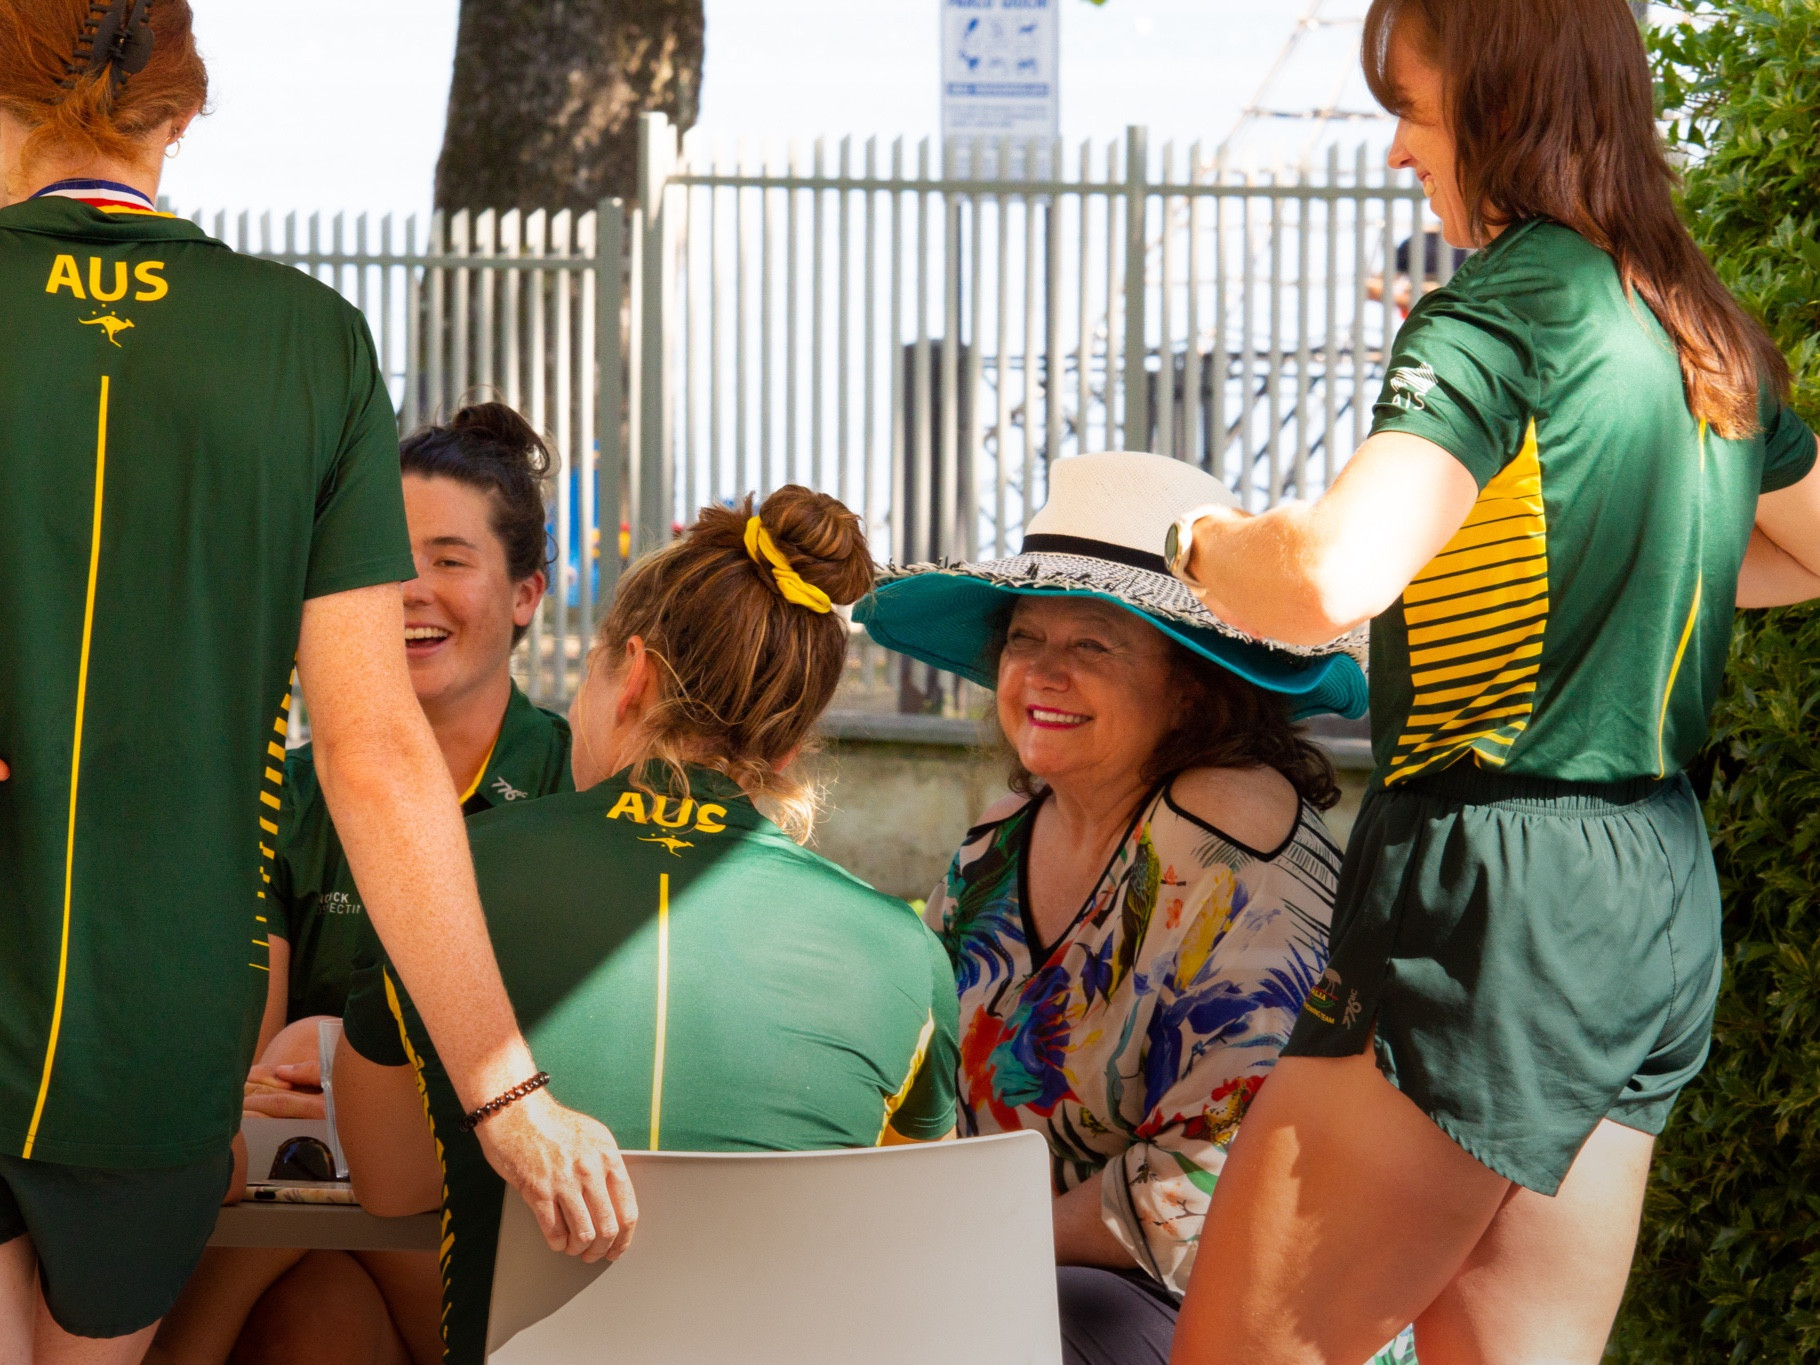 Gina Rinehart, second right, has ensured gender parity for gold medal-winning athletes as part of the Patron's Medal Achievement Incentive Fund ©Rowing Australia